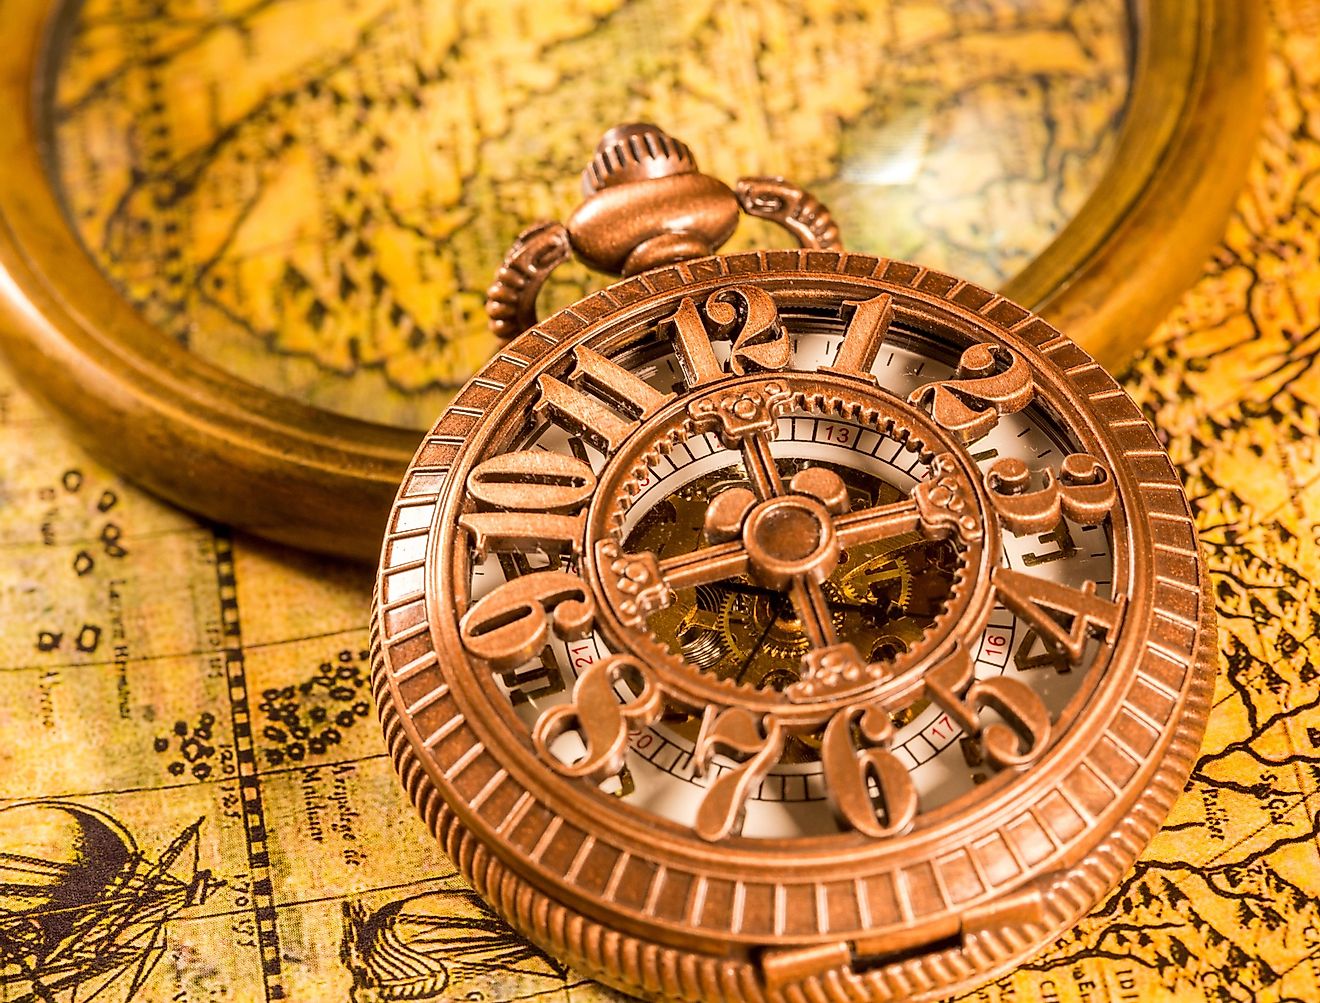 Vintage magnifying glass and pocket watch. Map of the Ancient World. Image credit RUl8let via shutterstock